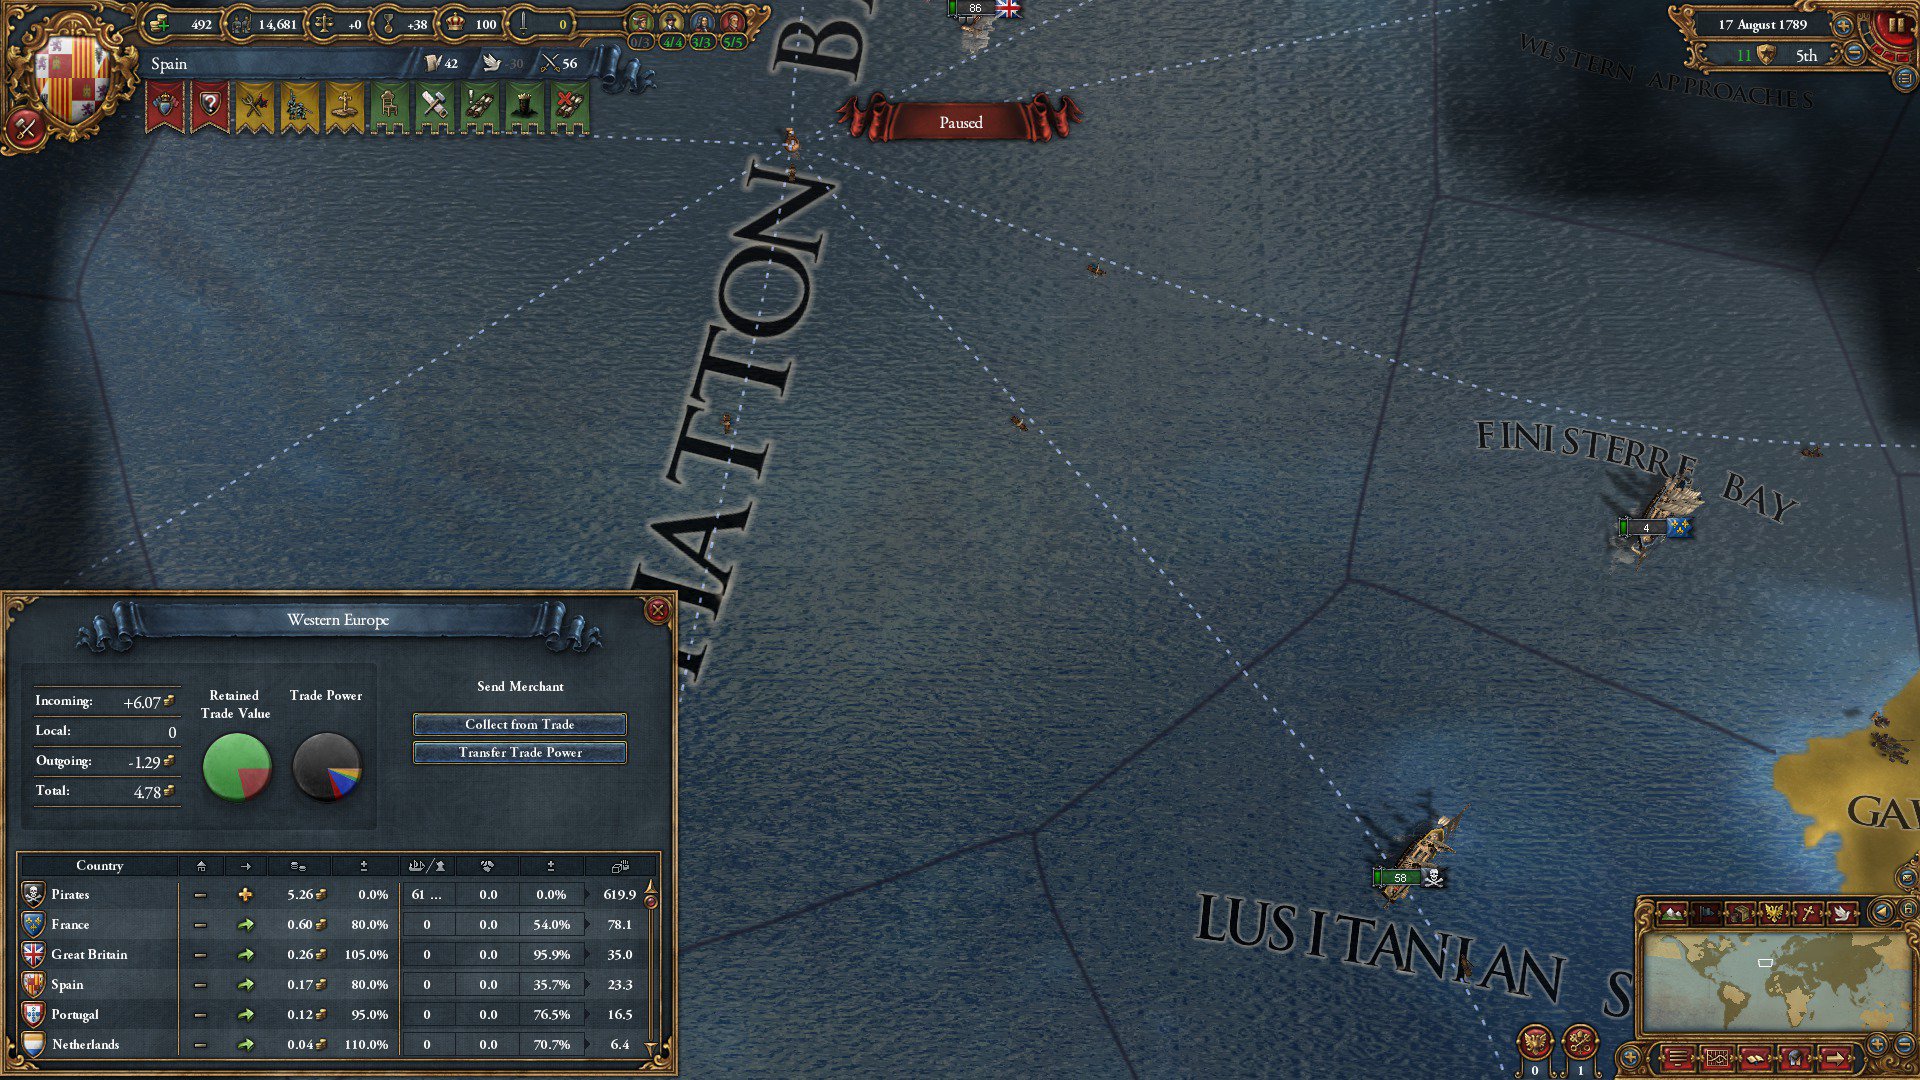 Europa Universalis IV Wealth of Nations 1